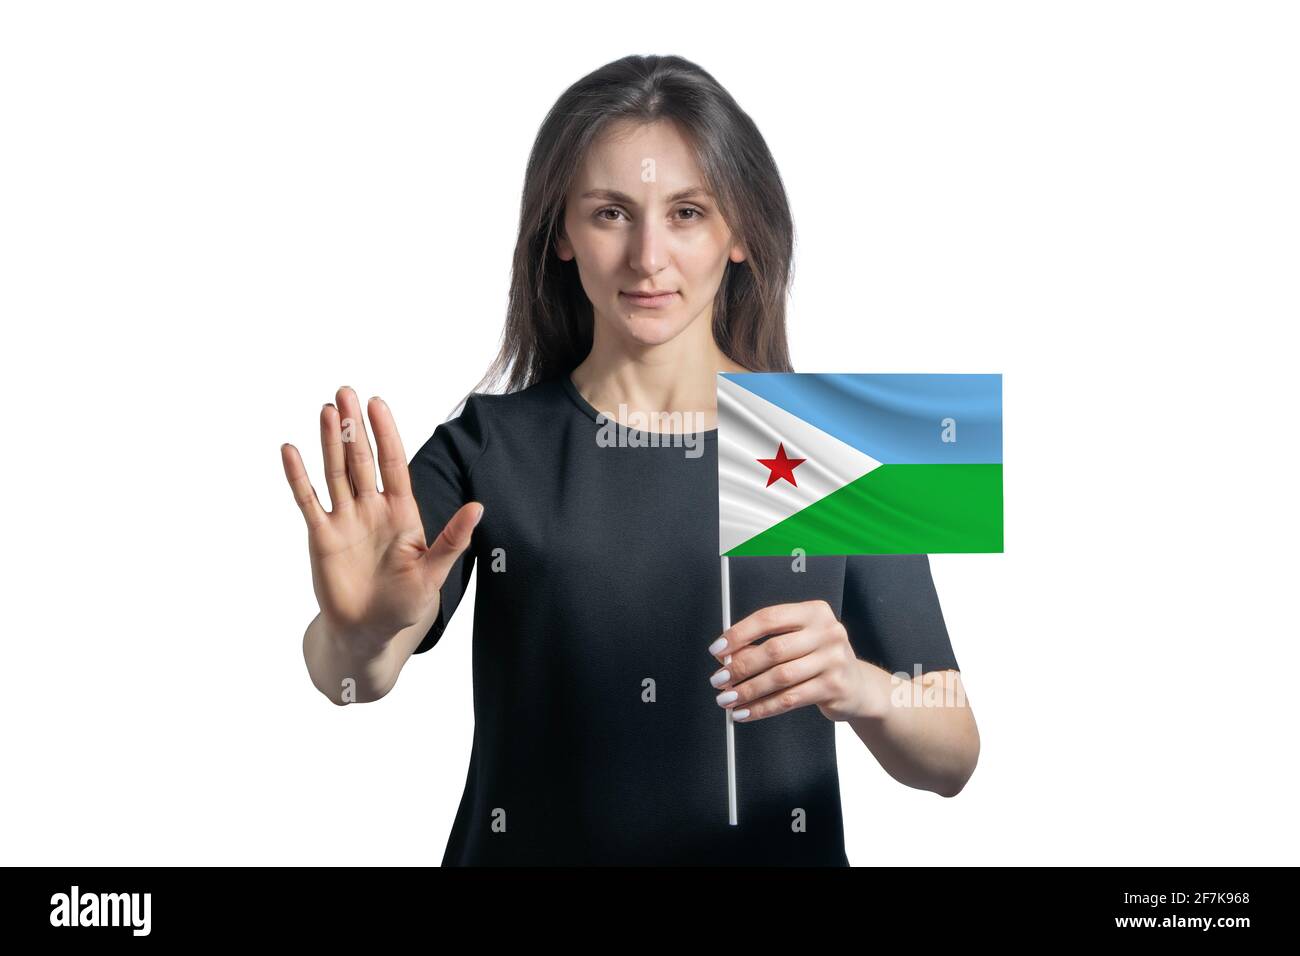 Happy young white woman holding flag of Djibouti and with a serious face shows a hand stop sign isolated on a white background. Stock Photo